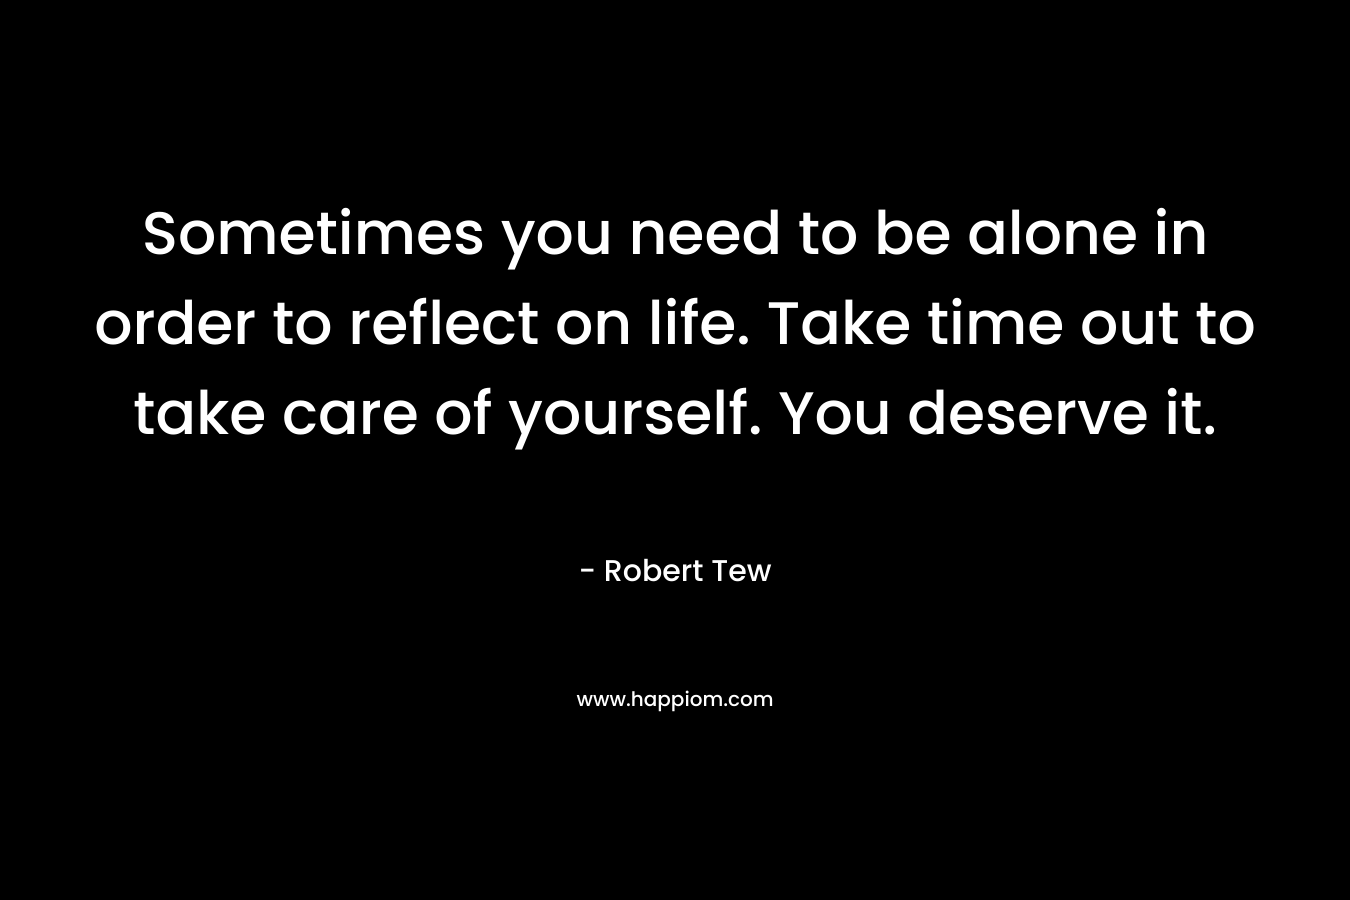 Sometimes you need to be alone in order to reflect on life. Take time out to take care of yourself. You deserve it.